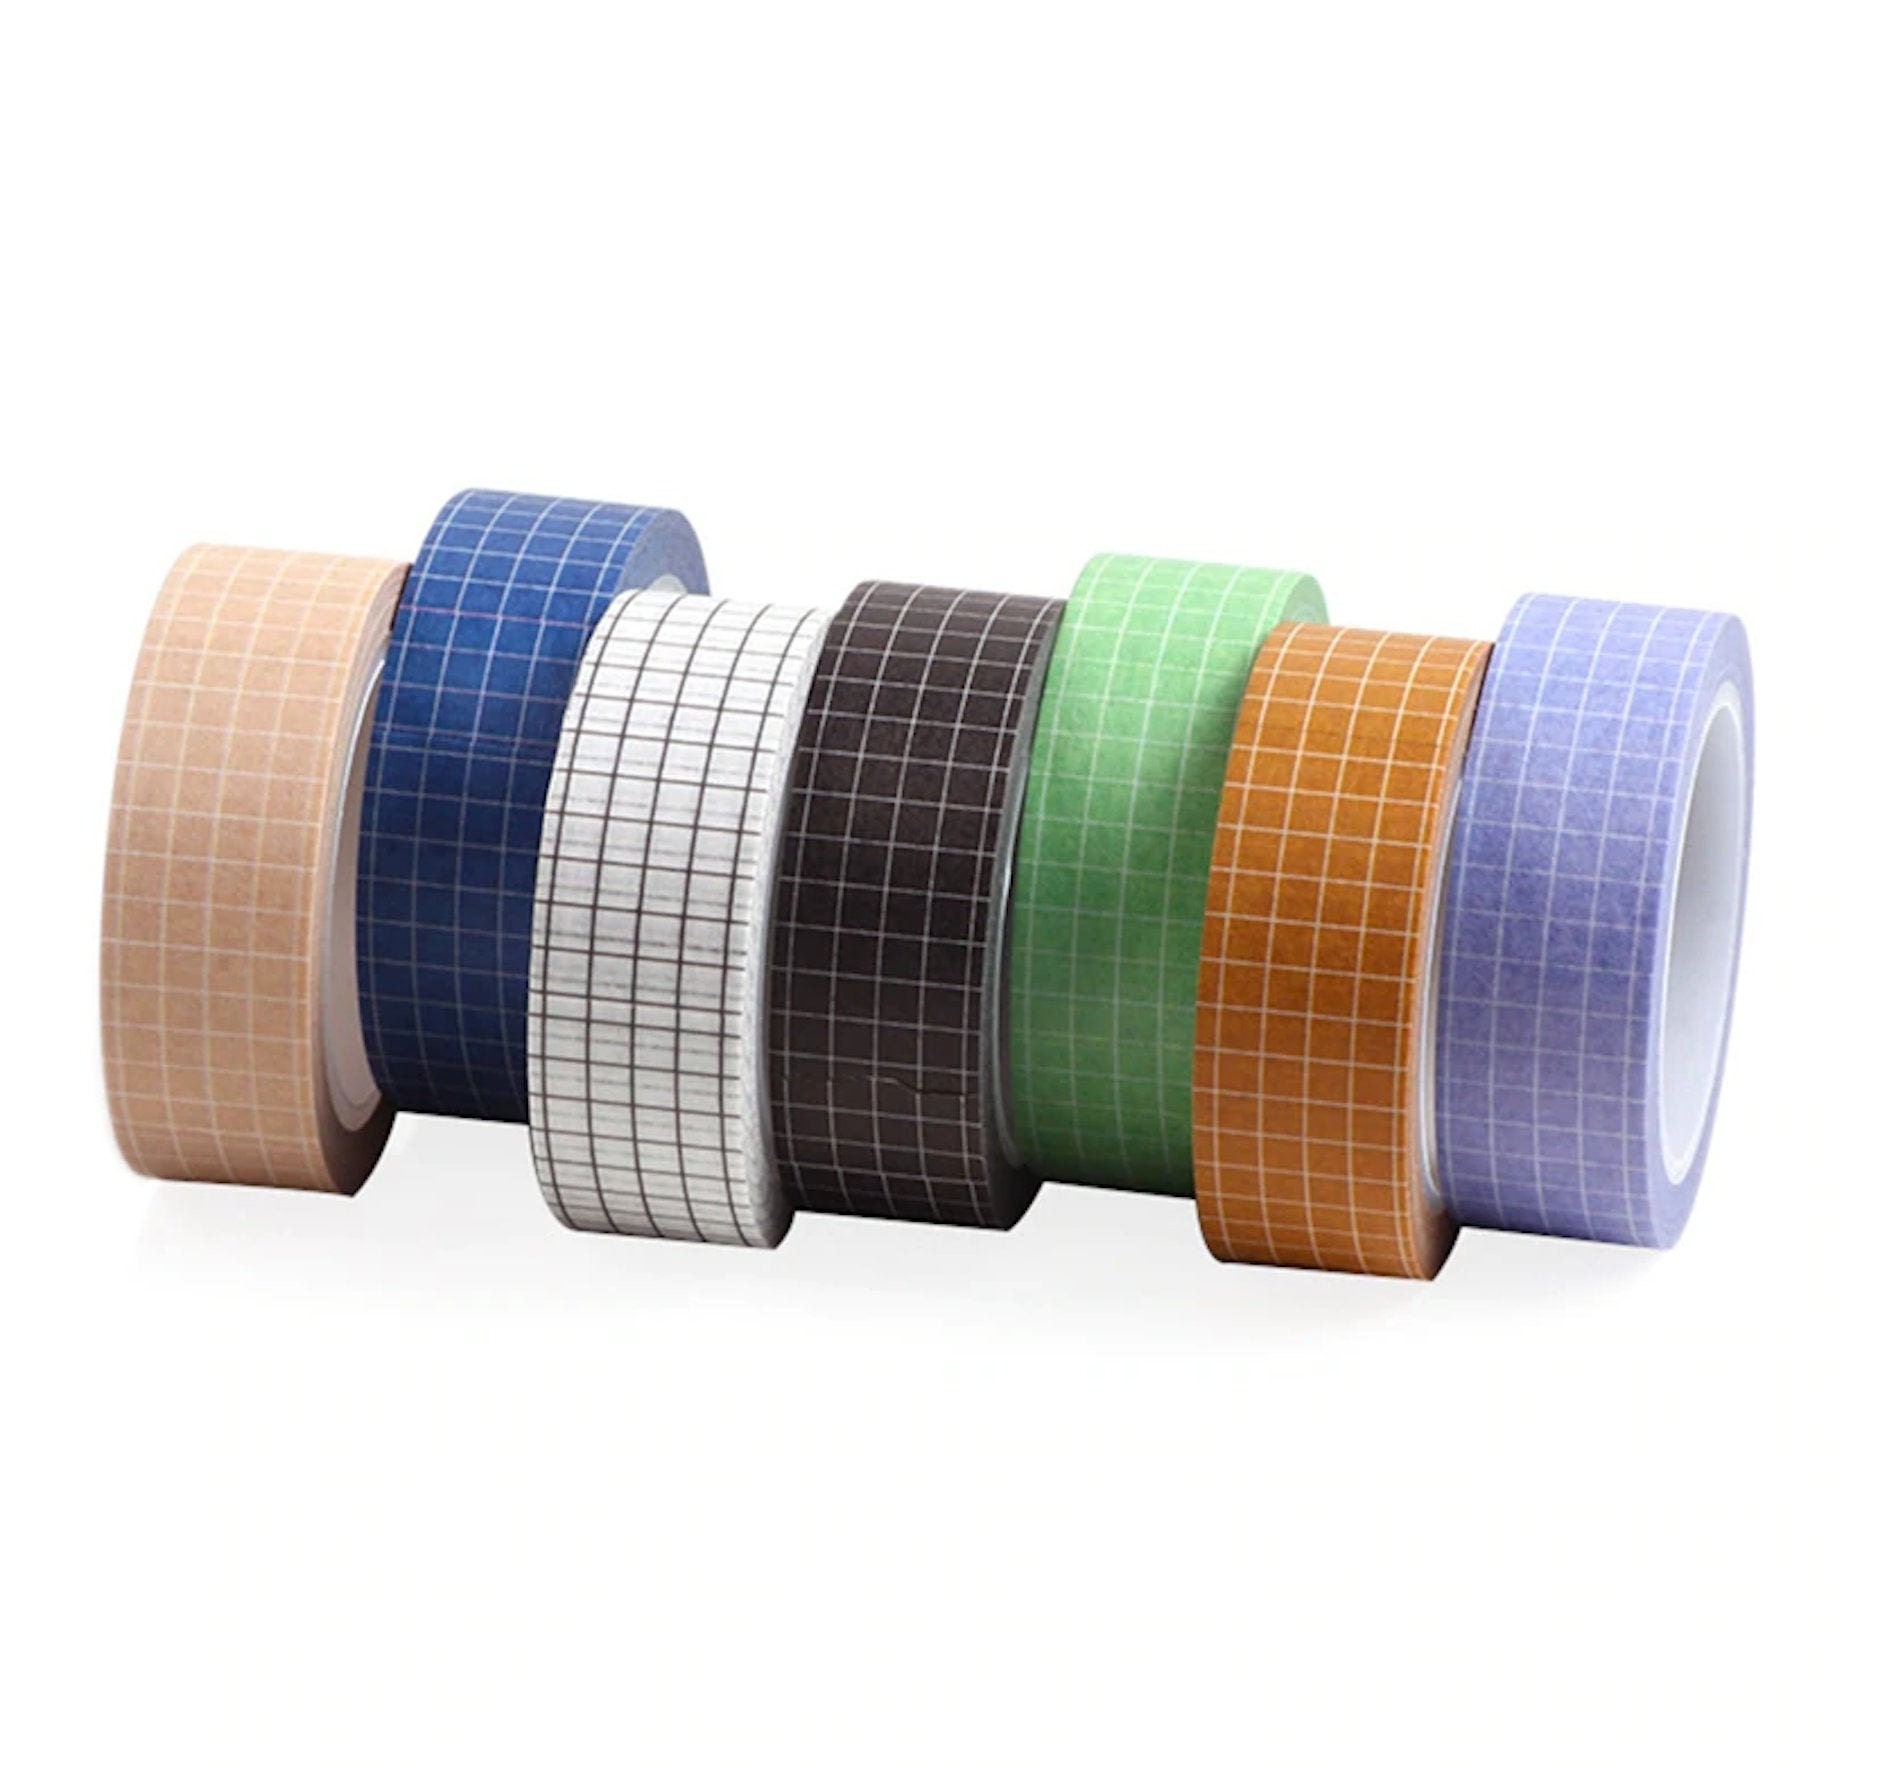 Knaid Grid Washi Tape Set, 14 Rolls of 15 mm Wide Decorative Colored M